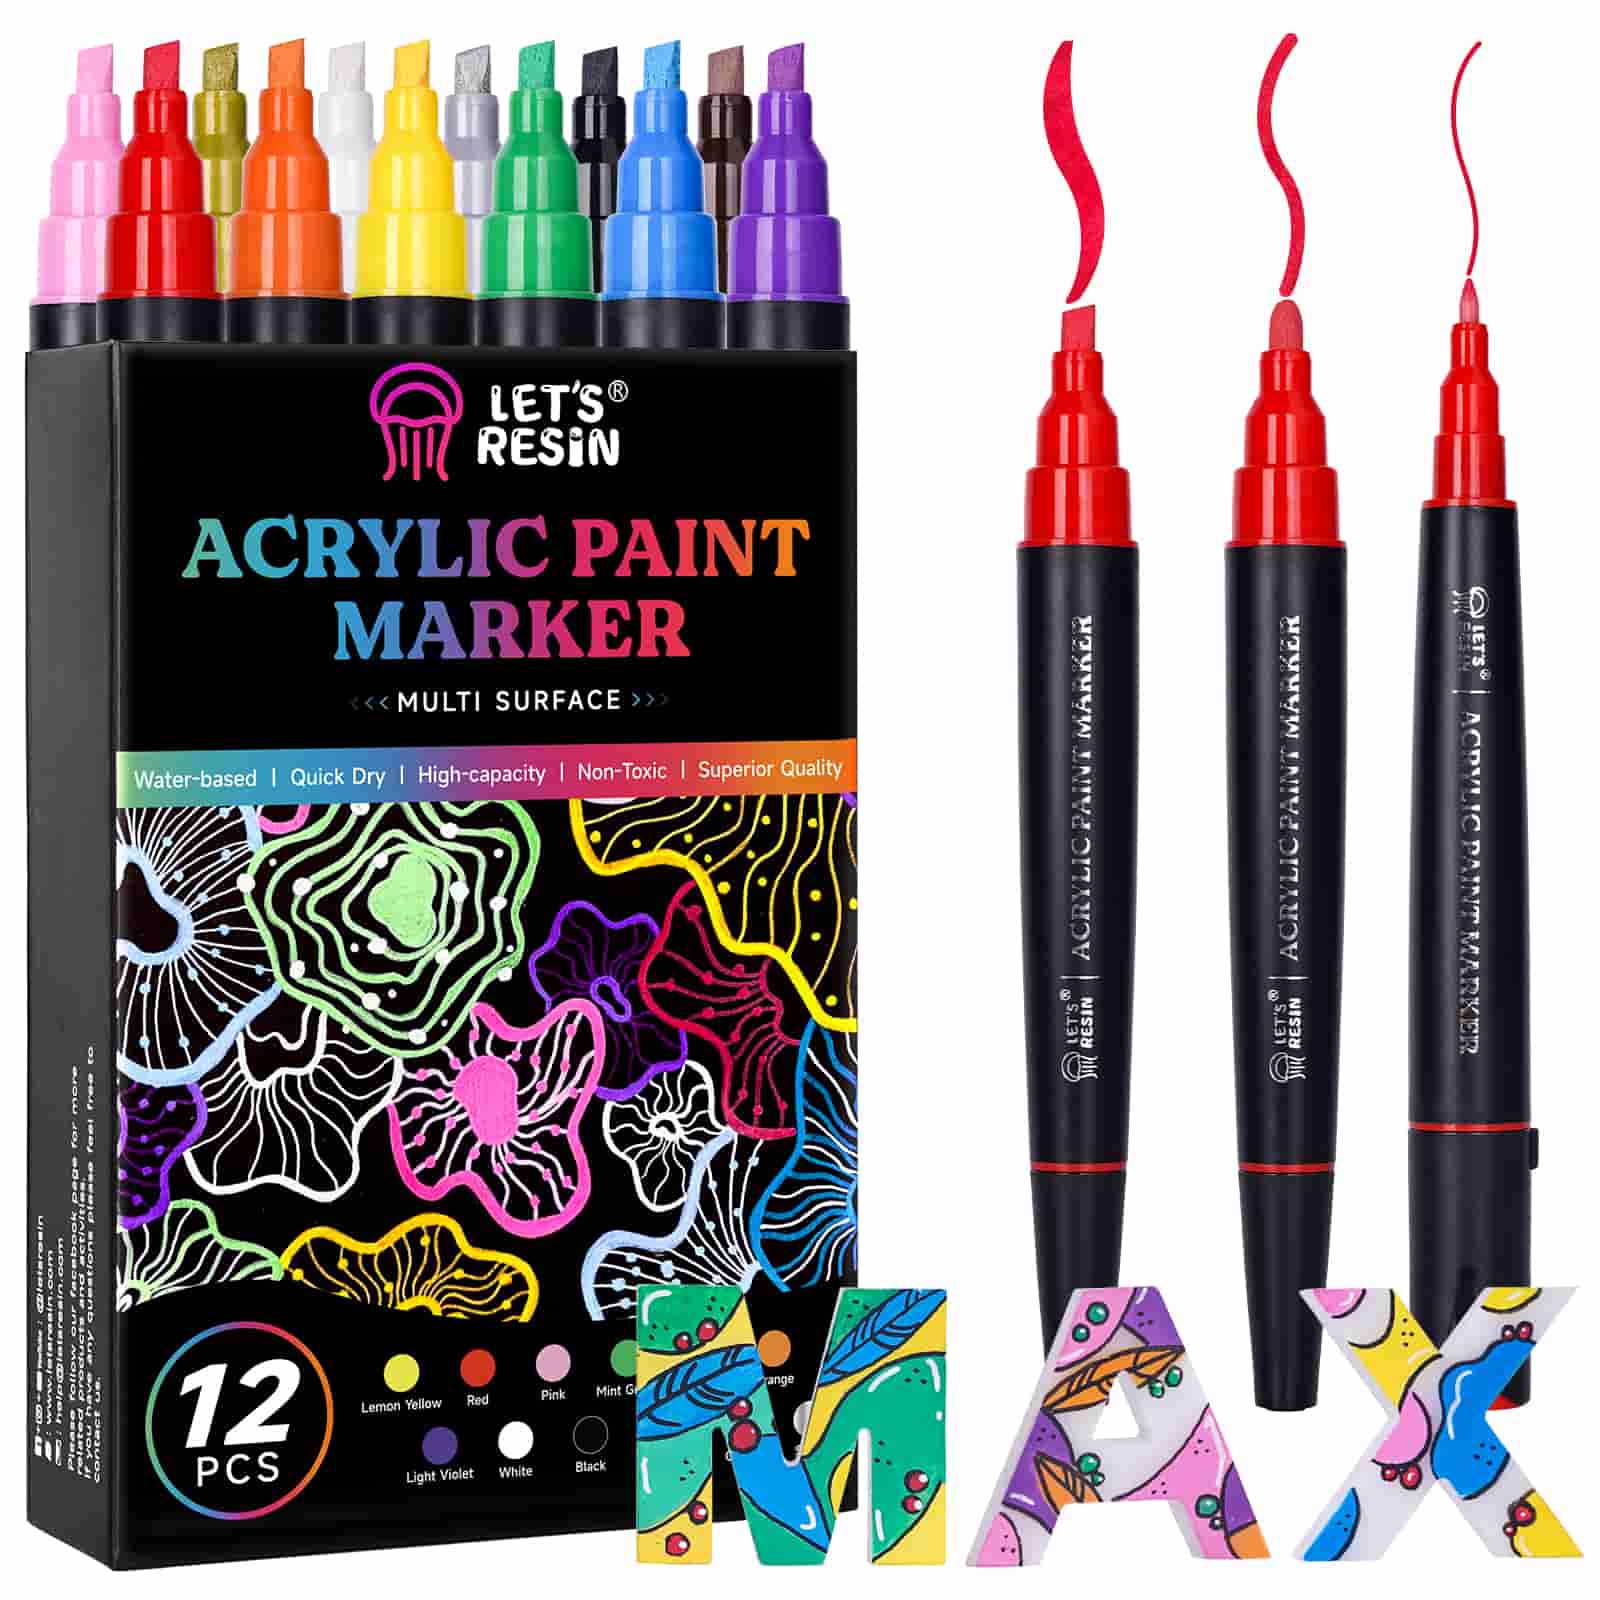 Let's Resin Acrylic Paint Markers - 12 Colors